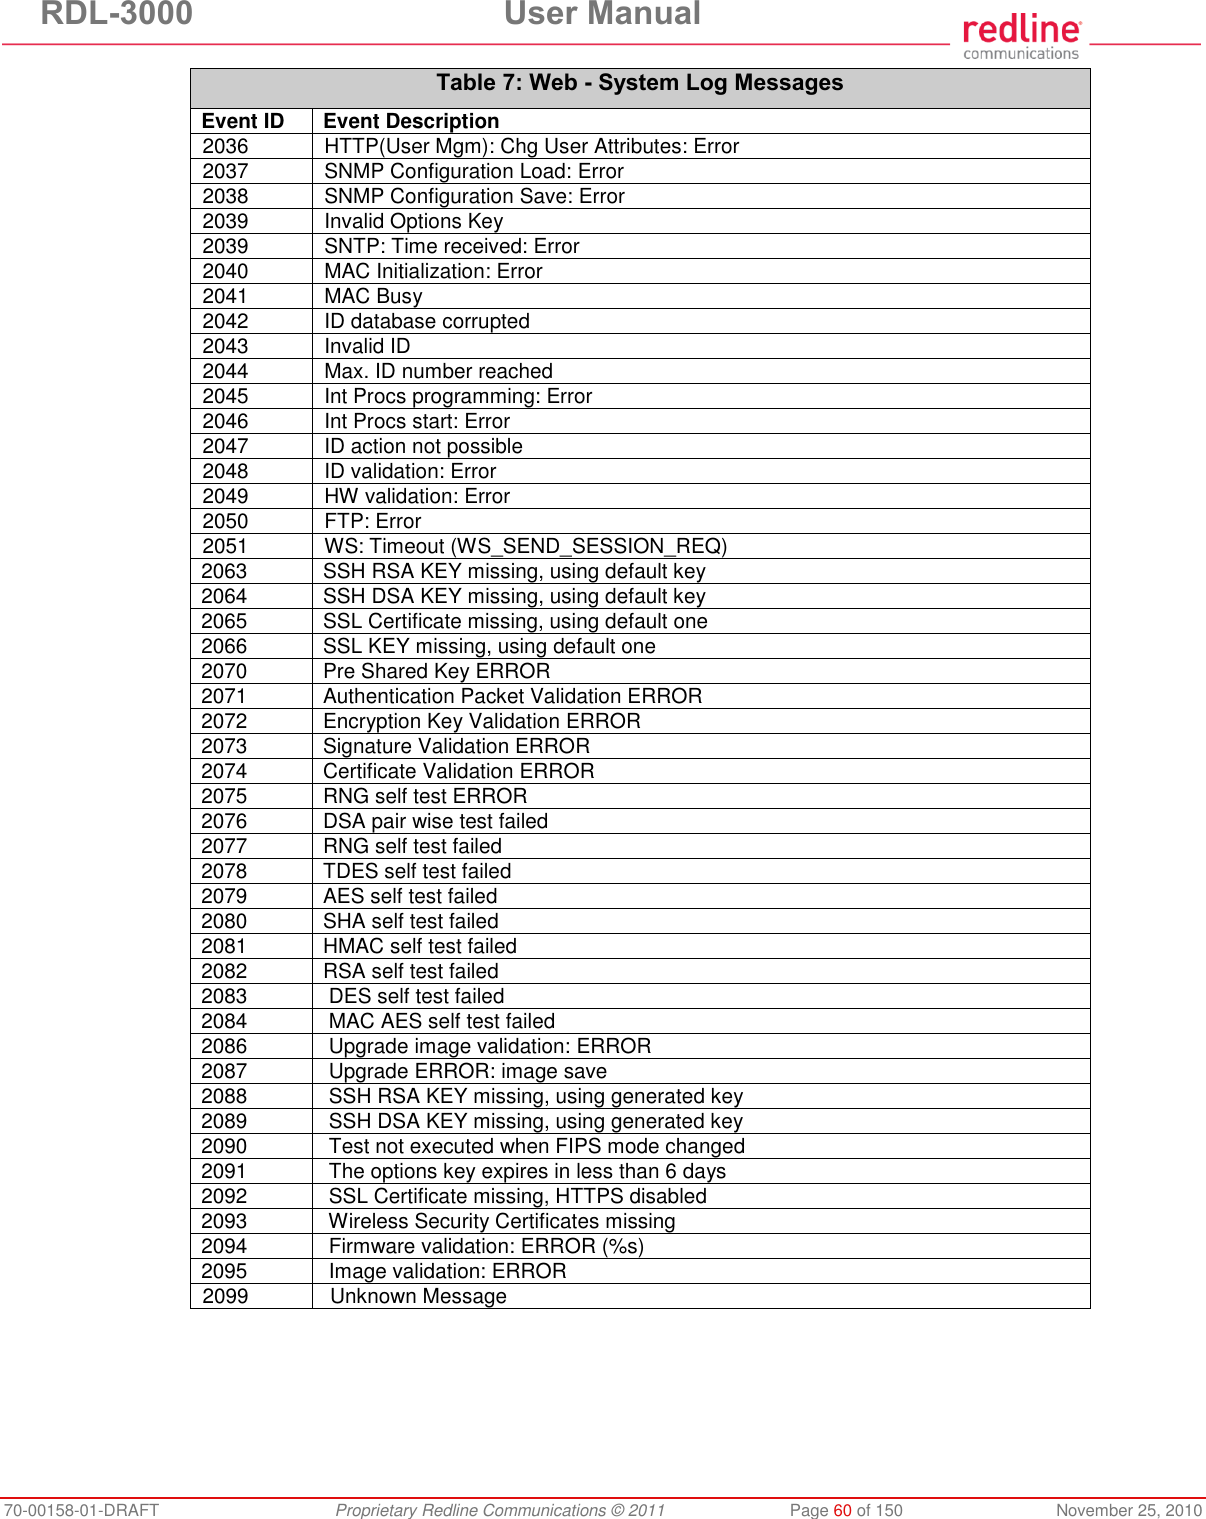 RDL-3000  User Manual 70-00158-01-DRAFT  Proprietary Redline Communications © 2011  Page 60 of 150  November 25, 2010 Table 7: Web - System Log Messages Event ID Event Description 2036  HTTP(User Mgm): Chg User Attributes: Error 2037  SNMP Configuration Load: Error 2038  SNMP Configuration Save: Error 2039  Invalid Options Key 2039  SNTP: Time received: Error 2040  MAC Initialization: Error 2041  MAC Busy 2042  ID database corrupted 2043  Invalid ID 2044  Max. ID number reached 2045  Int Procs programming: Error 2046  Int Procs start: Error 2047  ID action not possible 2048  ID validation: Error 2049  HW validation: Error 2050  FTP: Error 2051  WS: Timeout (WS_SEND_SESSION_REQ) 2063  SSH RSA KEY missing, using default key 2064  SSH DSA KEY missing, using default key 2065  SSL Certificate missing, using default one 2066  SSL KEY missing, using default one 2070  Pre Shared Key ERROR 2071  Authentication Packet Validation ERROR 2072  Encryption Key Validation ERROR 2073  Signature Validation ERROR 2074  Certificate Validation ERROR 2075  RNG self test ERROR 2076  DSA pair wise test failed   2077  RNG self test failed 2078  TDES self test failed 2079  AES self test failed 2080  SHA self test failed 2081  HMAC self test failed 2082  RSA self test failed 2083   DES self test failed 2084   MAC AES self test failed 2086   Upgrade image validation: ERROR 2087   Upgrade ERROR: image save 2088   SSH RSA KEY missing, using generated key 2089   SSH DSA KEY missing, using generated key 2090   Test not executed when FIPS mode changed 2091   The options key expires in less than 6 days 2092   SSL Certificate missing, HTTPS disabled 2093   Wireless Security Certificates missing 2094   Firmware validation: ERROR (%s) 2095   Image validation: ERROR 2099   Unknown Message 